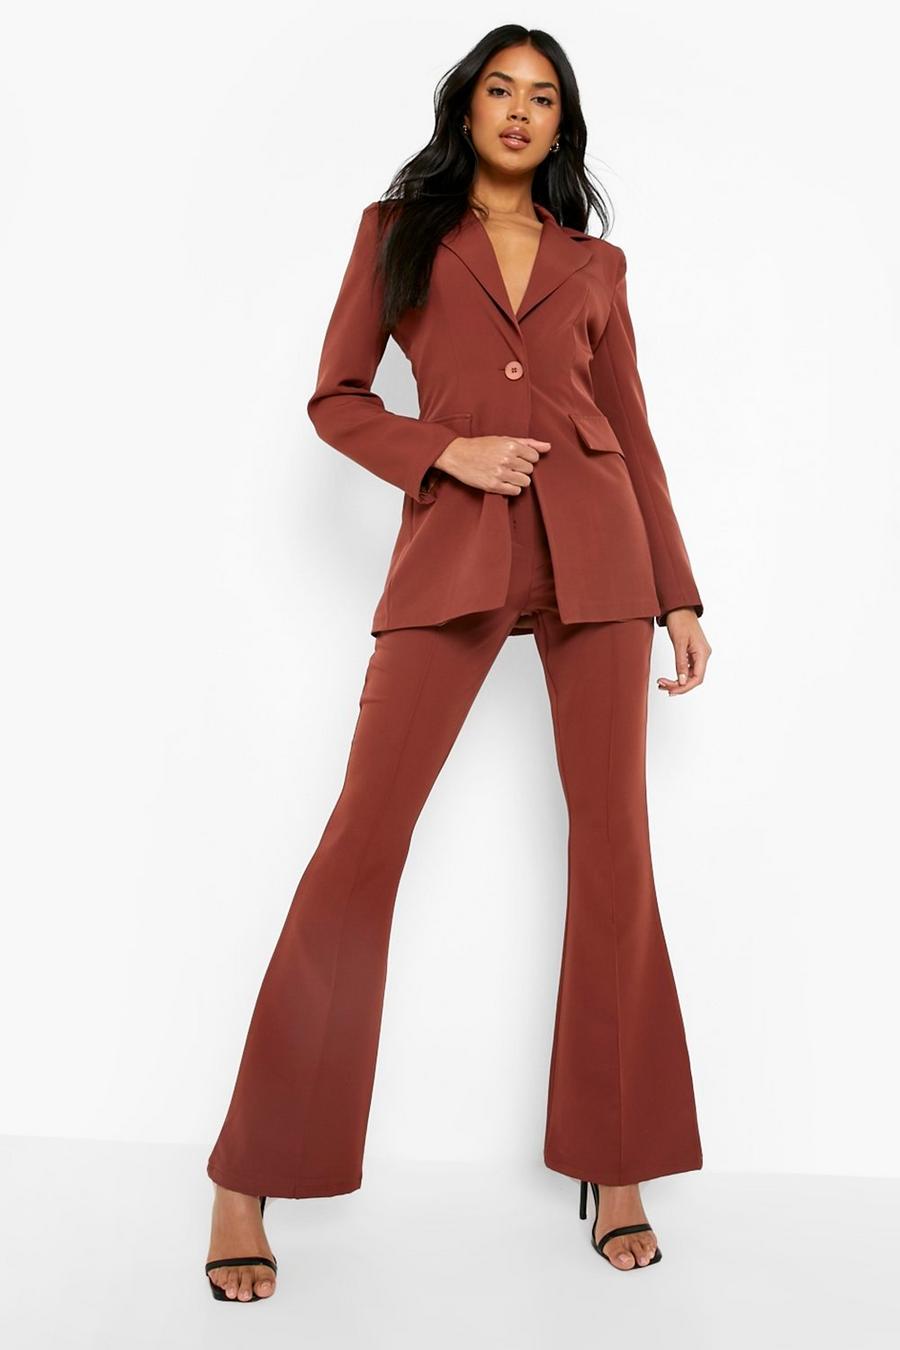 Chocolate brown Seam Detail Fit & Flare Pants